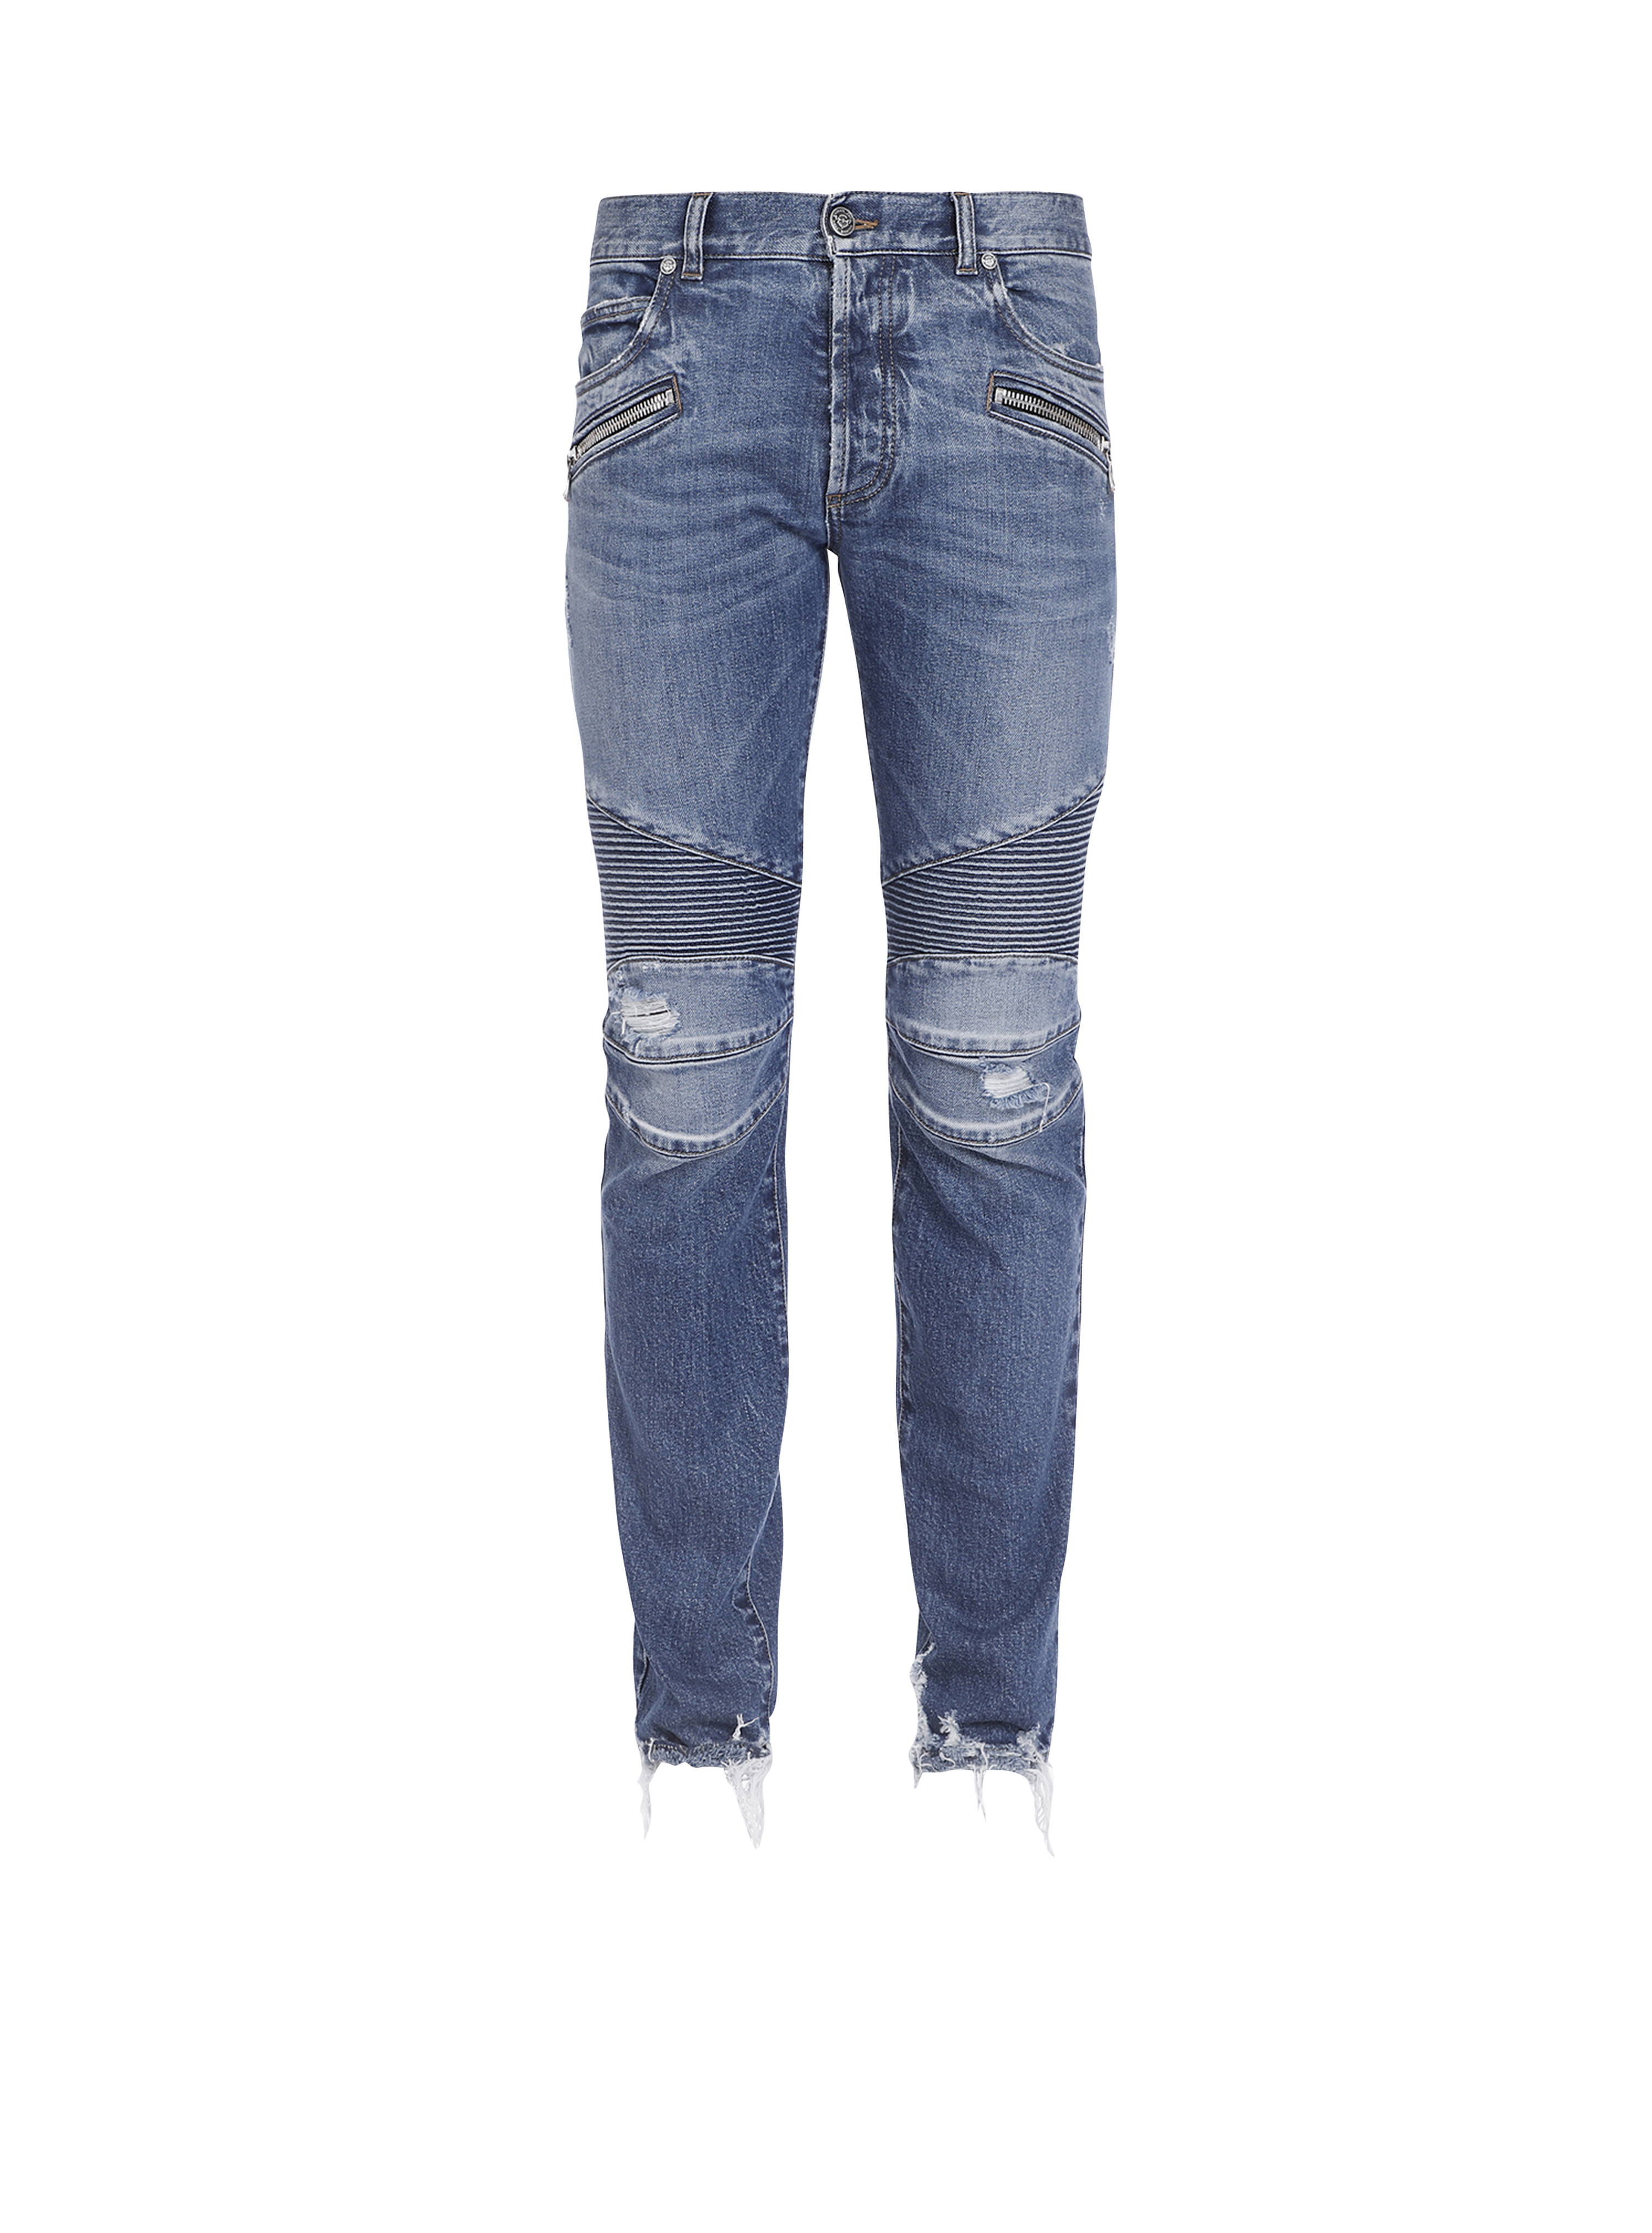 Tapered ripped blue cotton jeans, blue